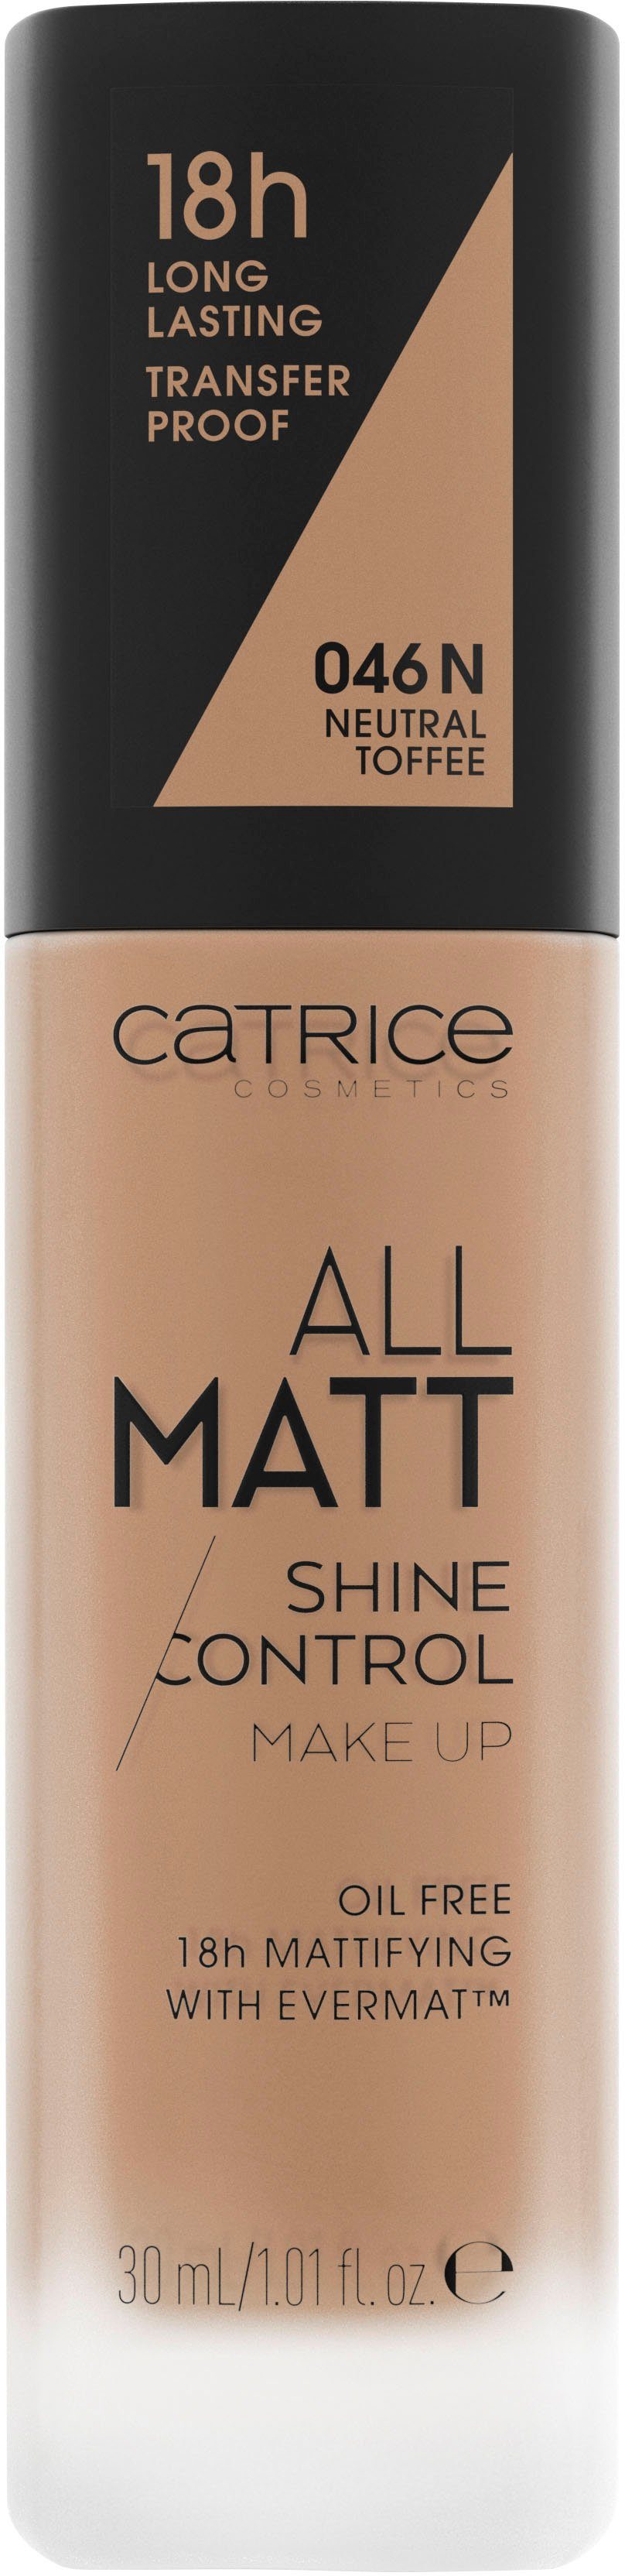 Catrice Foundation All Matt Shine Up Control Neutral Make Toffee